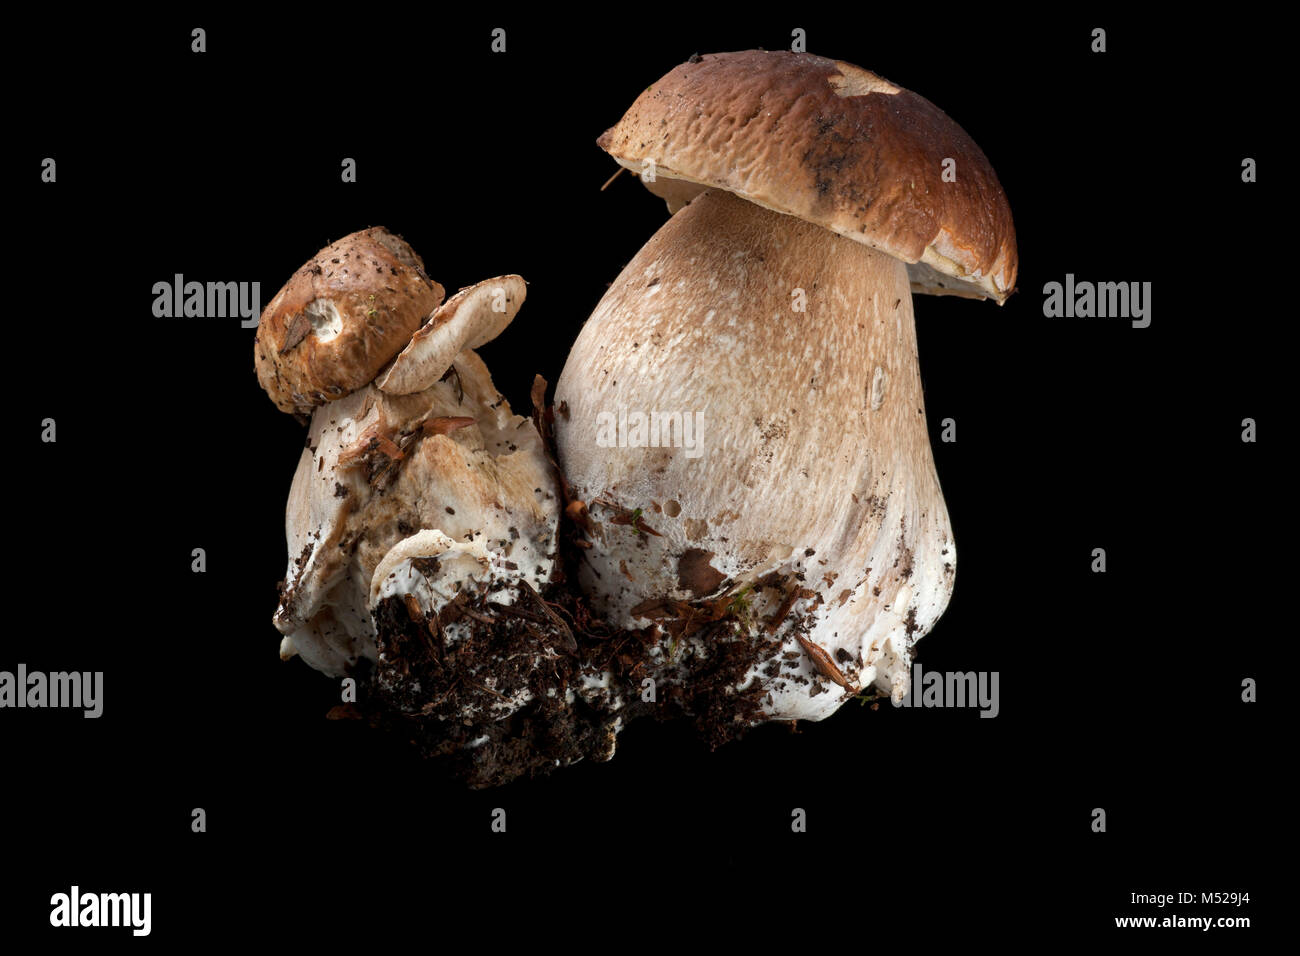 Studio picture of two cep or penny bun fungi on black background. Hampshire England UK GB Stock Photo